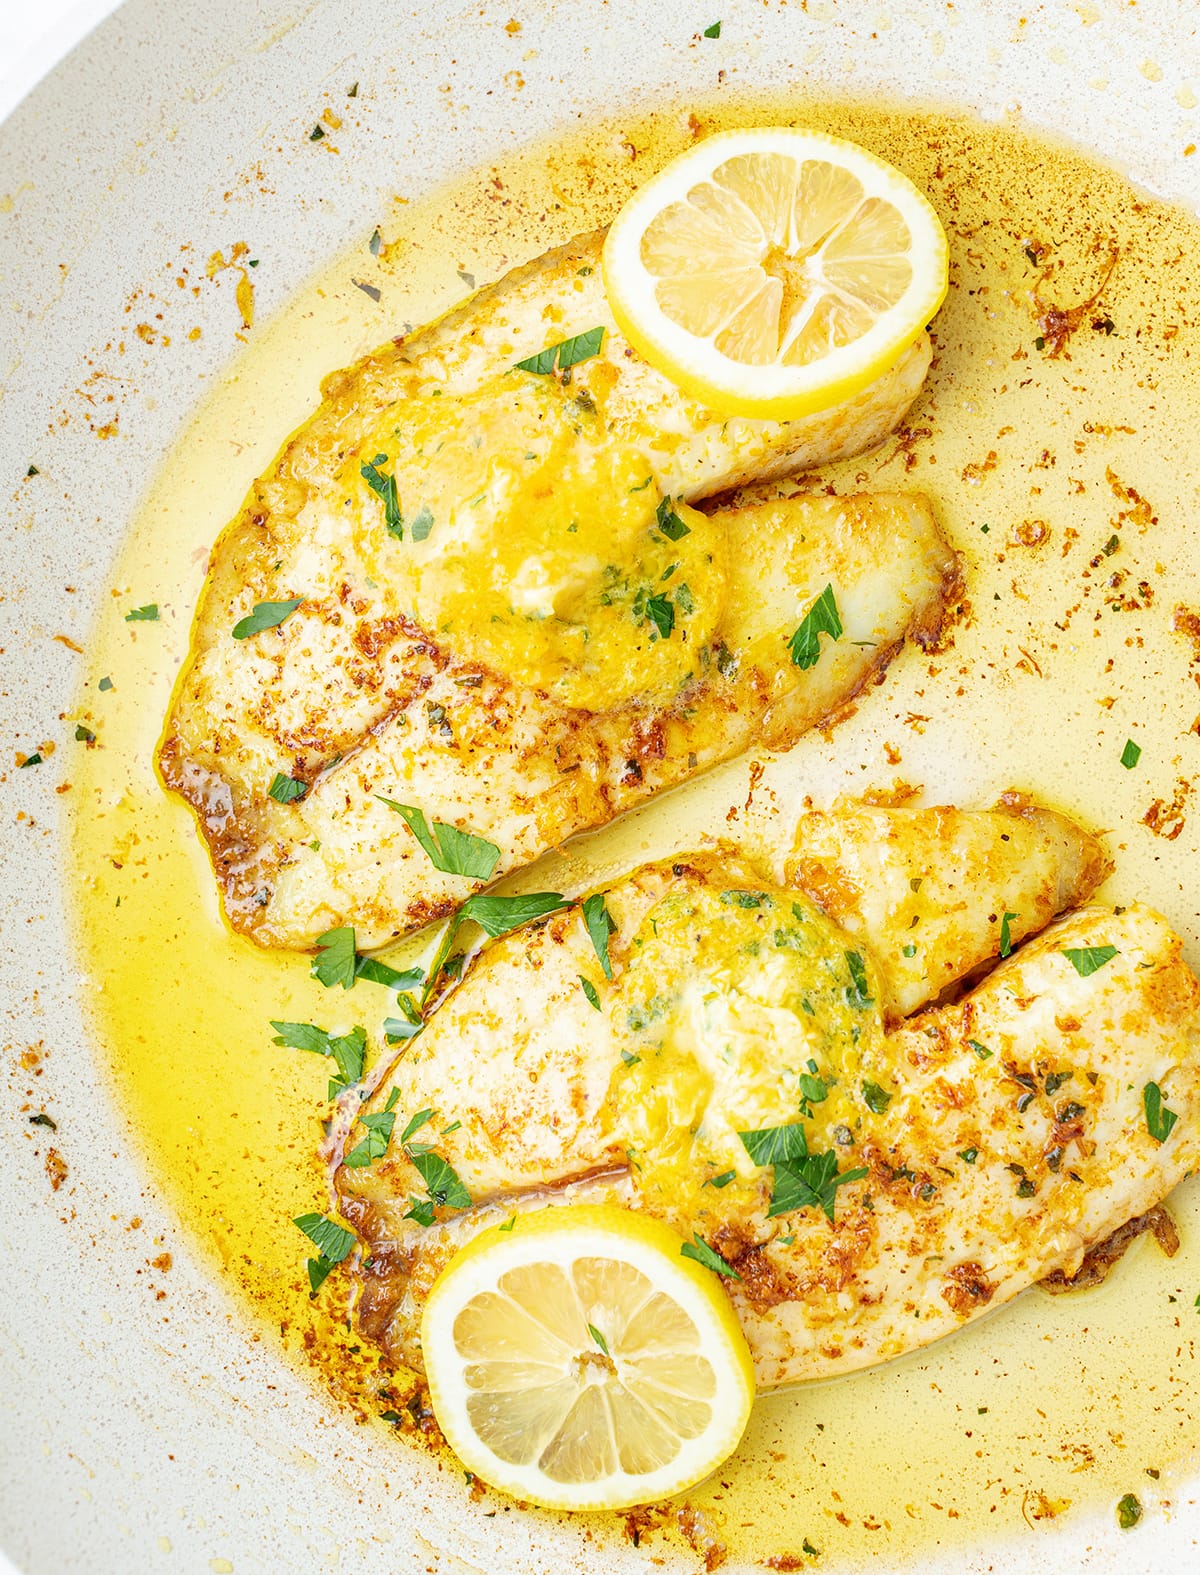 Two Tilapia fillets topped with citrus butter and lemon slices.